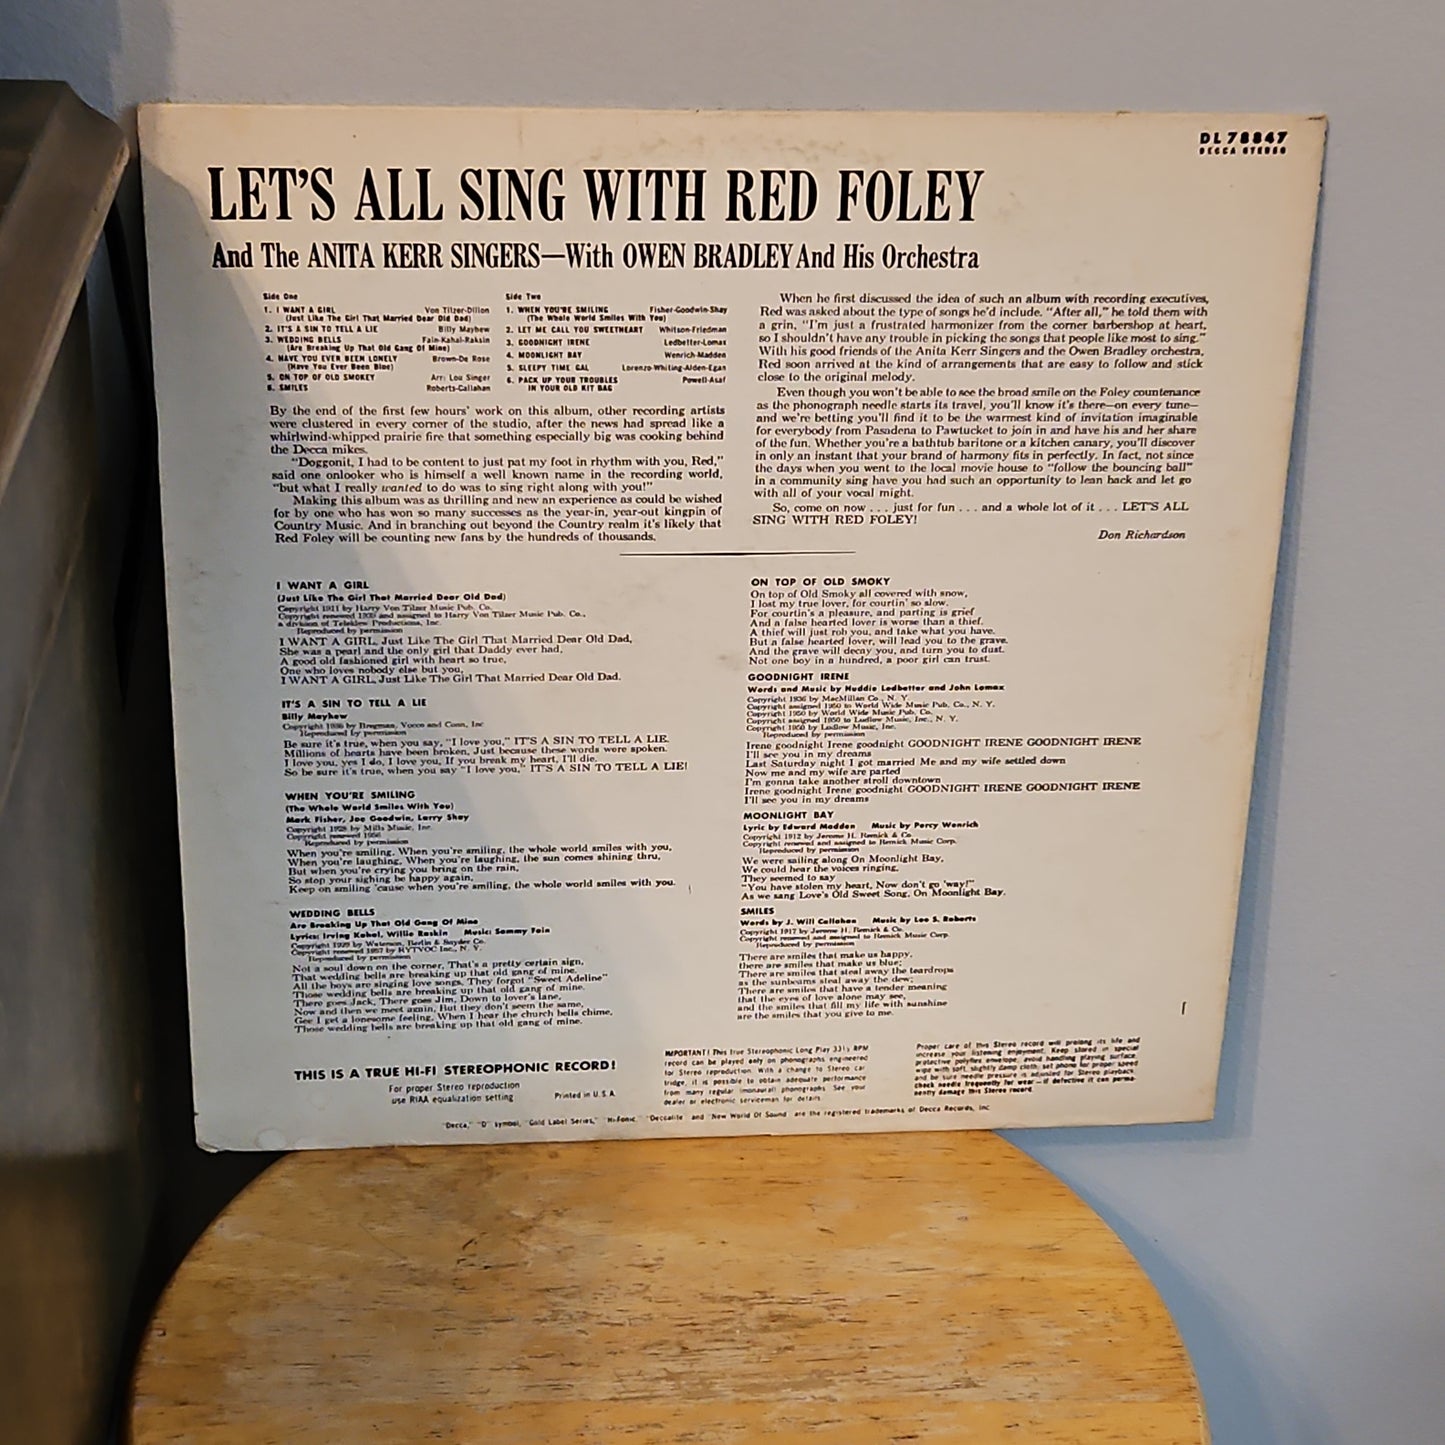 Let's All Sing With Red Foley By Decca Records